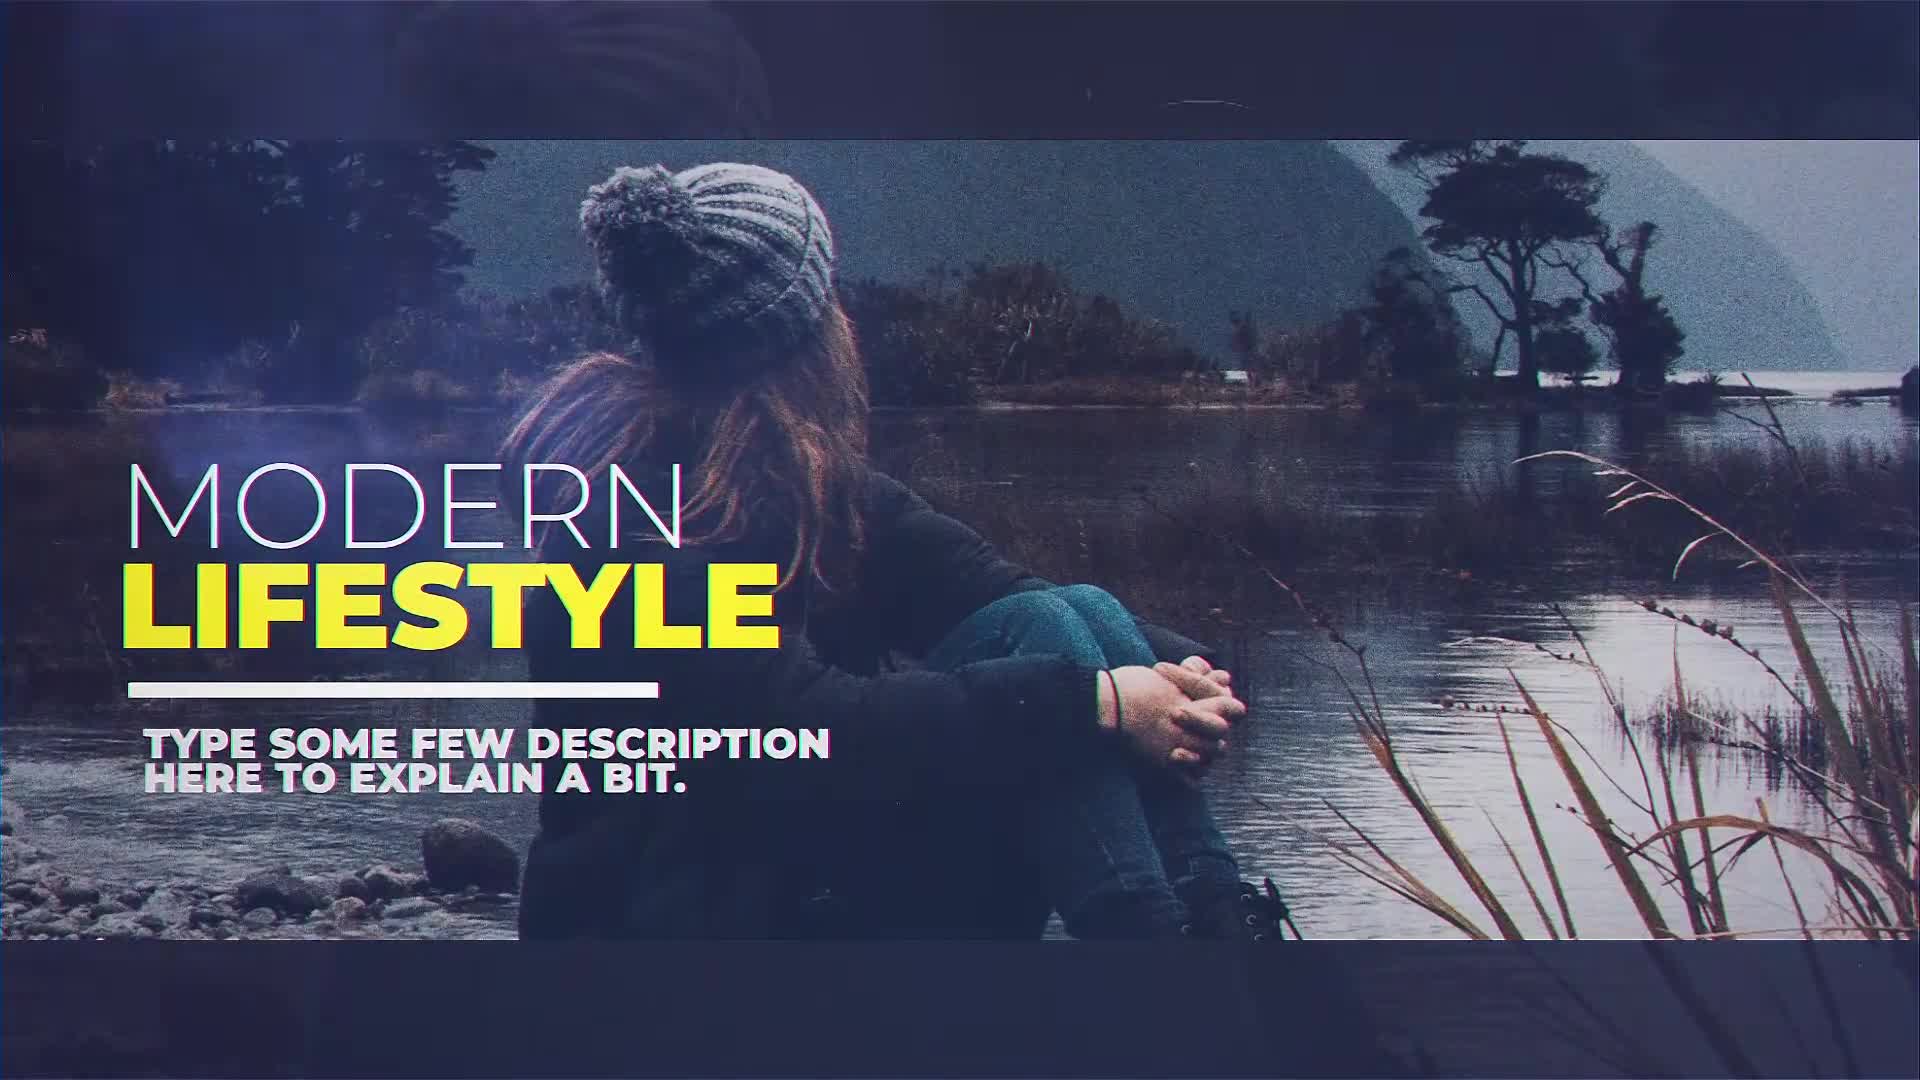 Modern Lifestyle - Download Videohive 23188417